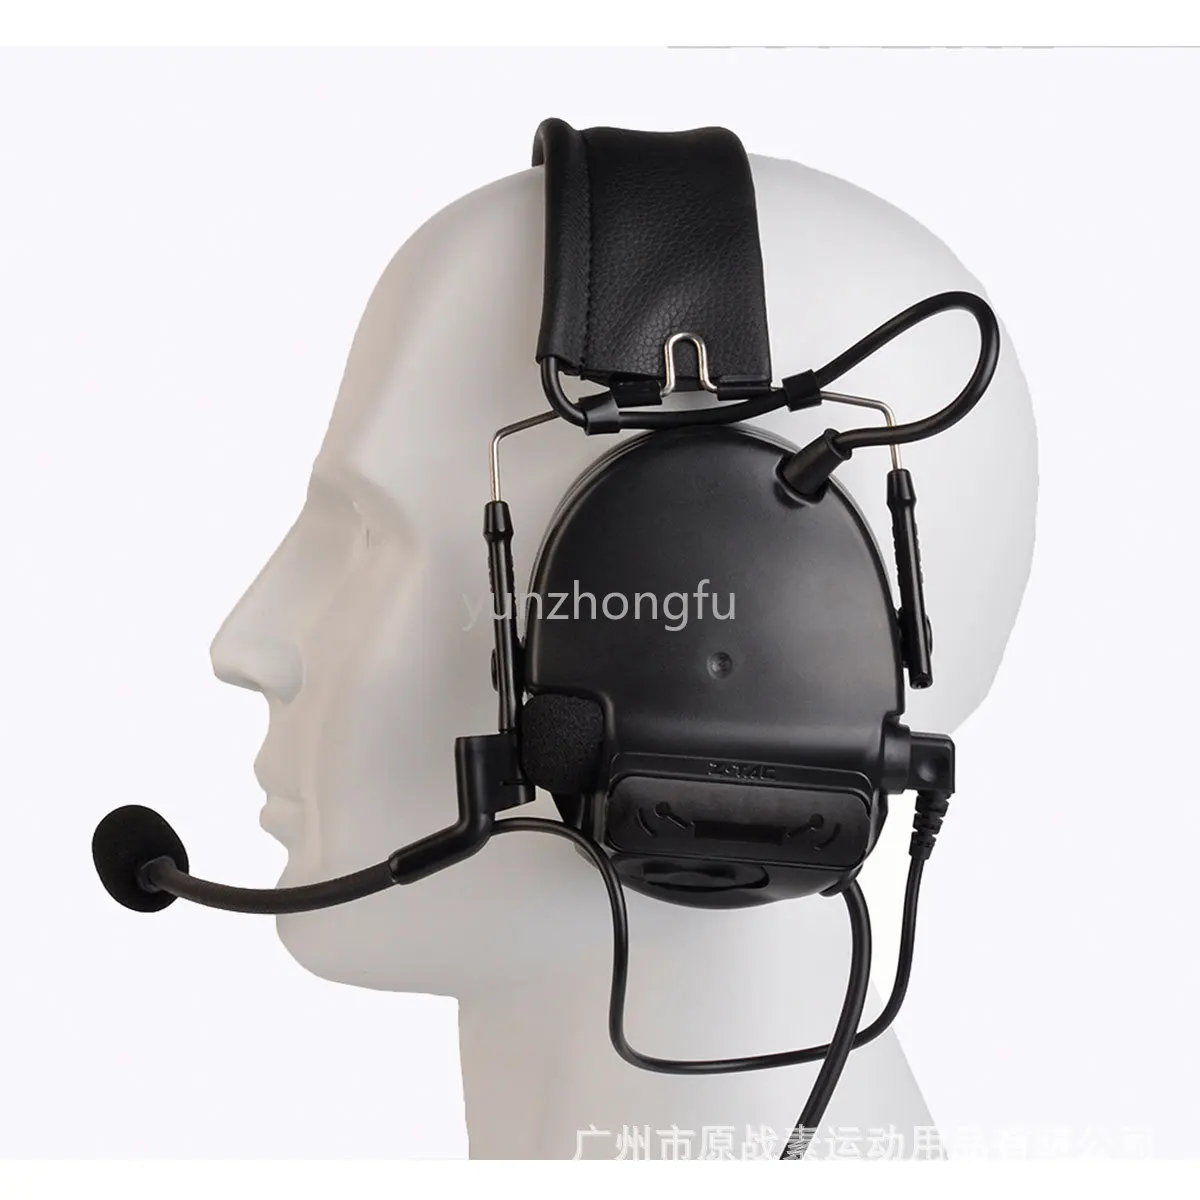 

6 Th Generation C3 Head Pickup Noise Reduction Tactical Headset Dual Channel Walkie-Talkie Mobile Phone Sports Headset